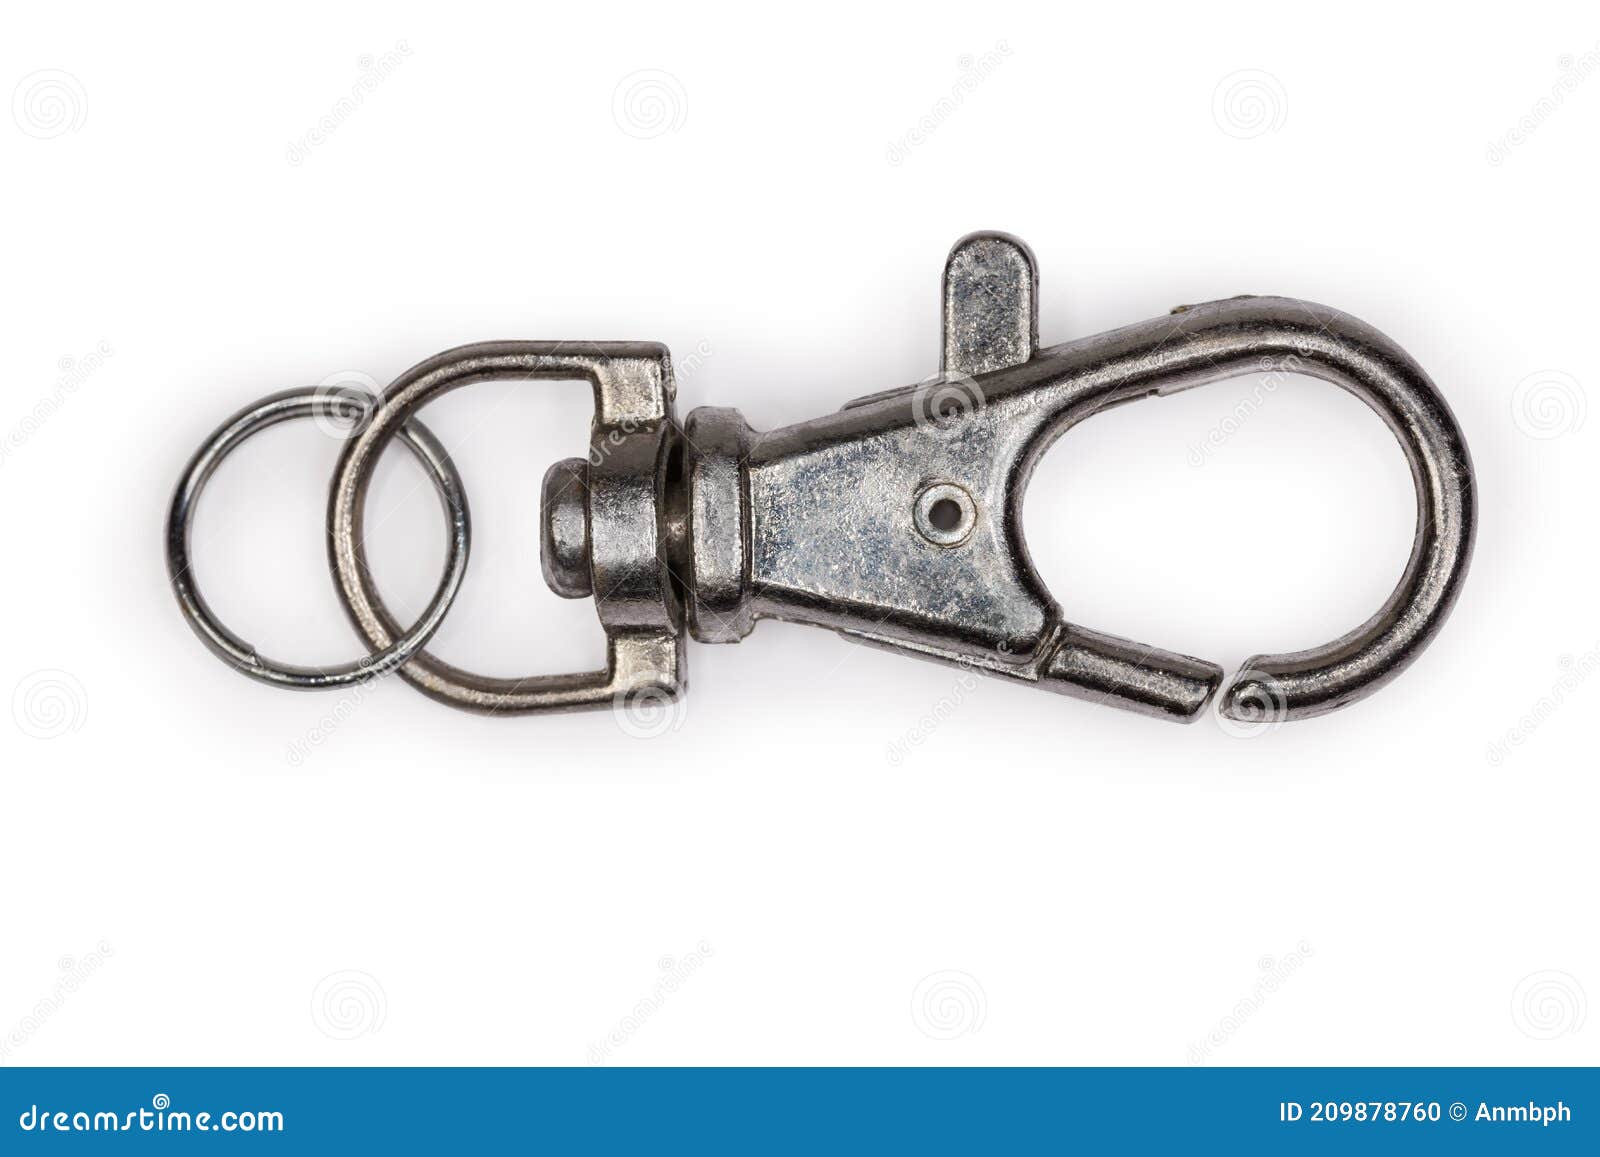 https://thumbs.dreamstime.com/z/metal-swivel-eye-snap-hook-close-up-selective-focus-small-white-background-top-view-209878760.jpg